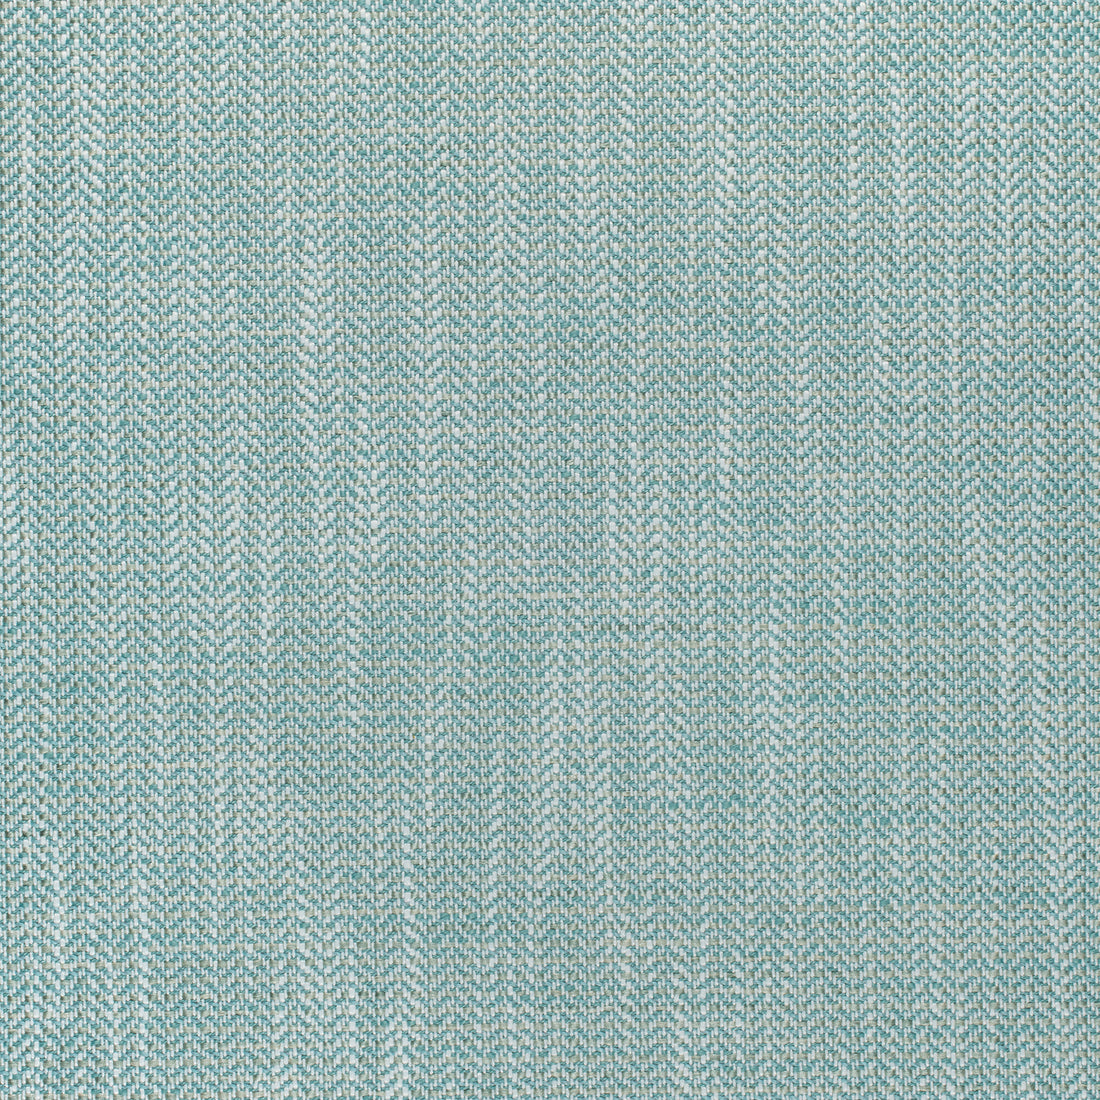 Ashbourne Tweed fabric in aqua color - pattern number W80610 - by Thibaut in the Pinnacle collection